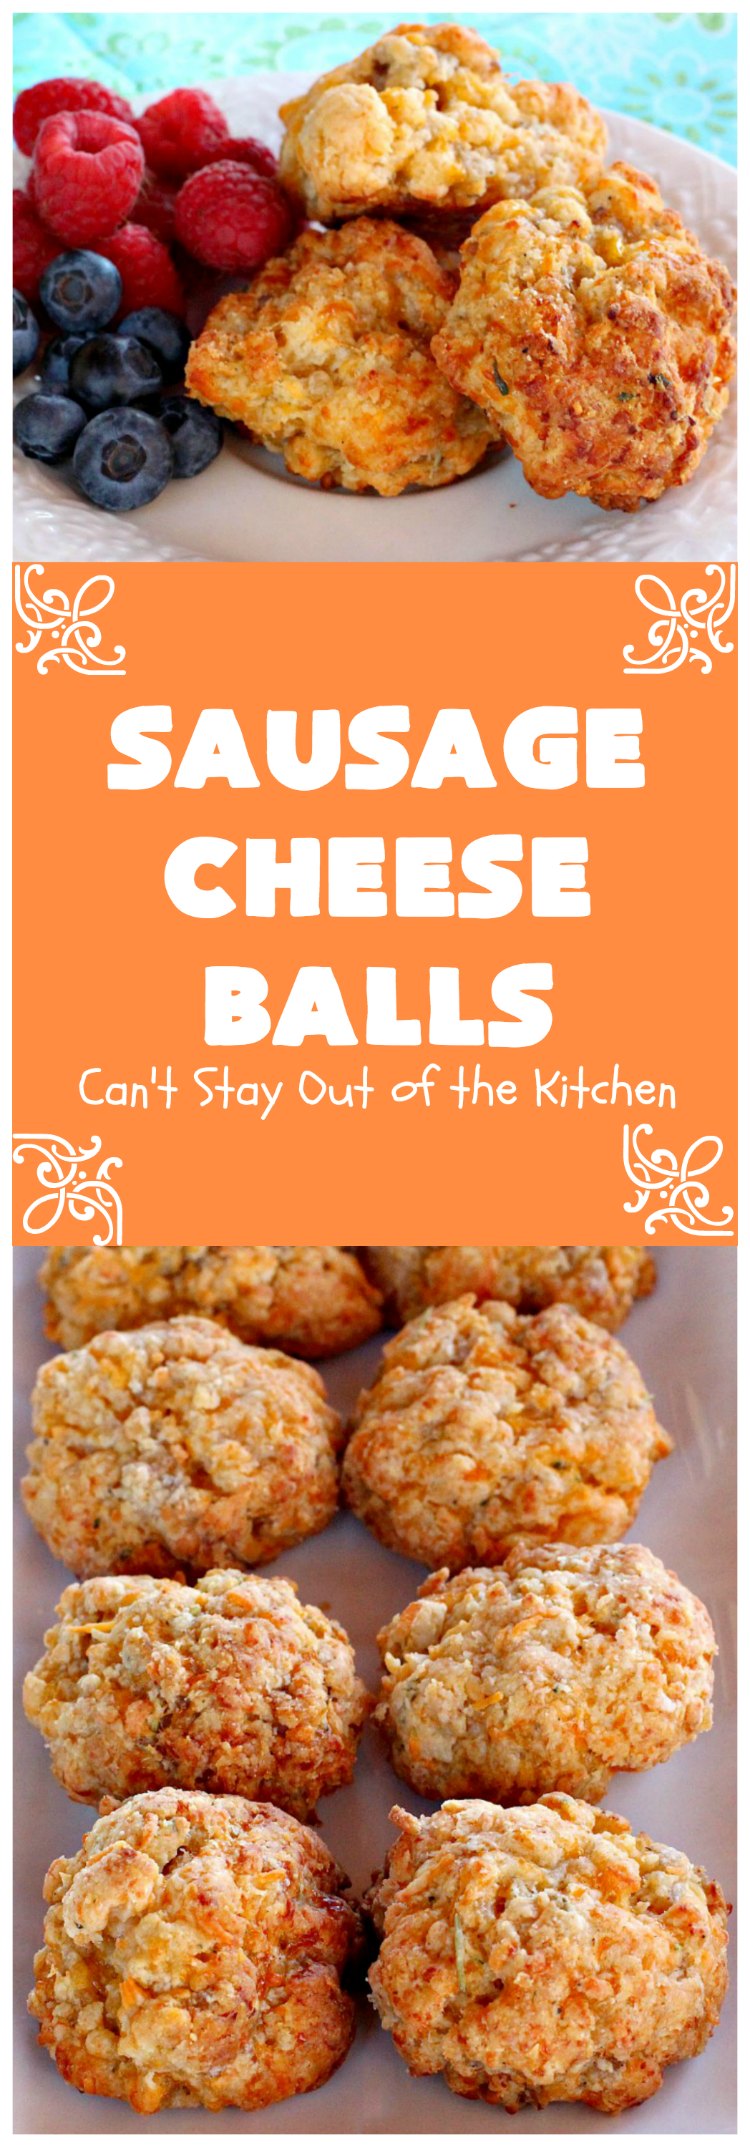 Sausage Cheese Balls | Can't Stay Out of the Kitchen